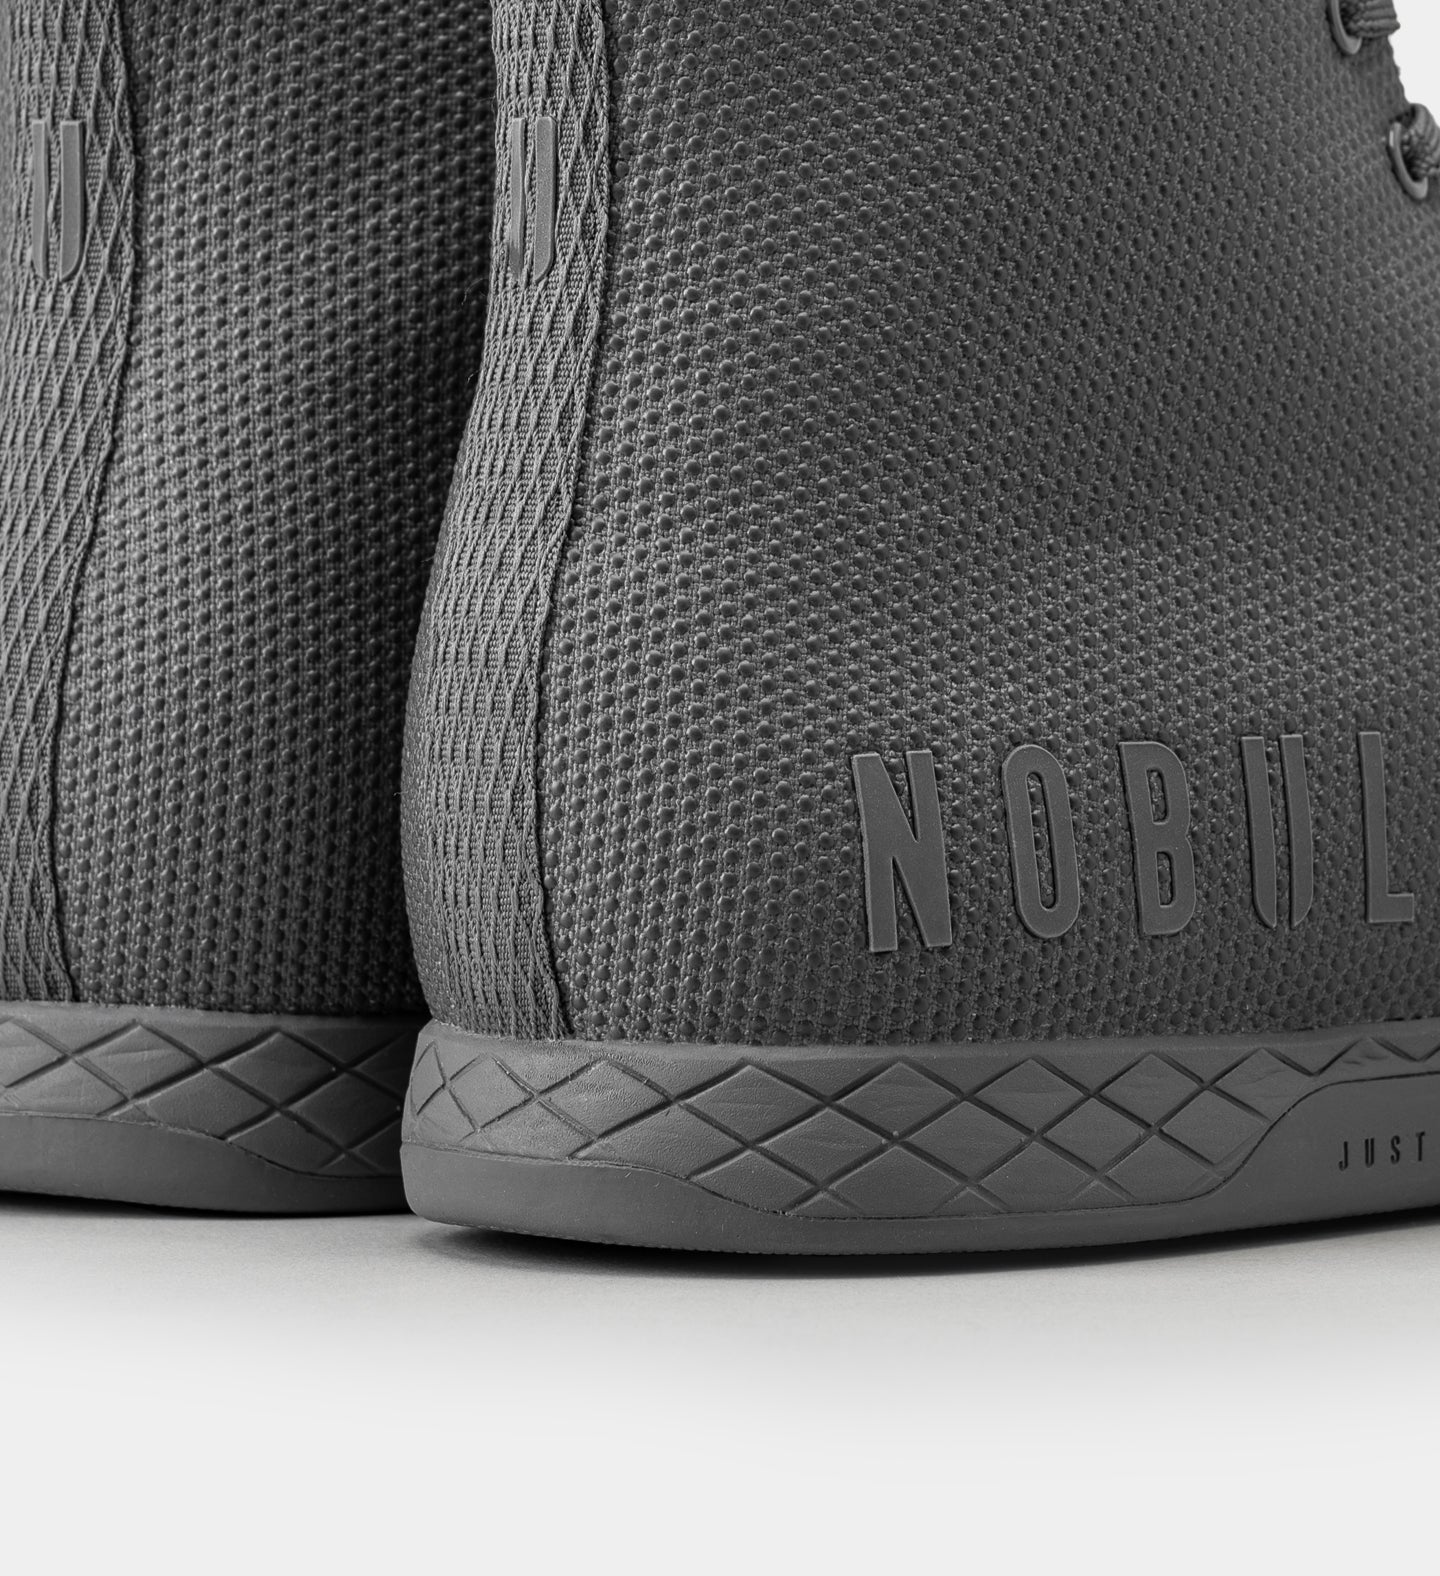 NOBULL High Top Trainer Review - Cross Train Clothes